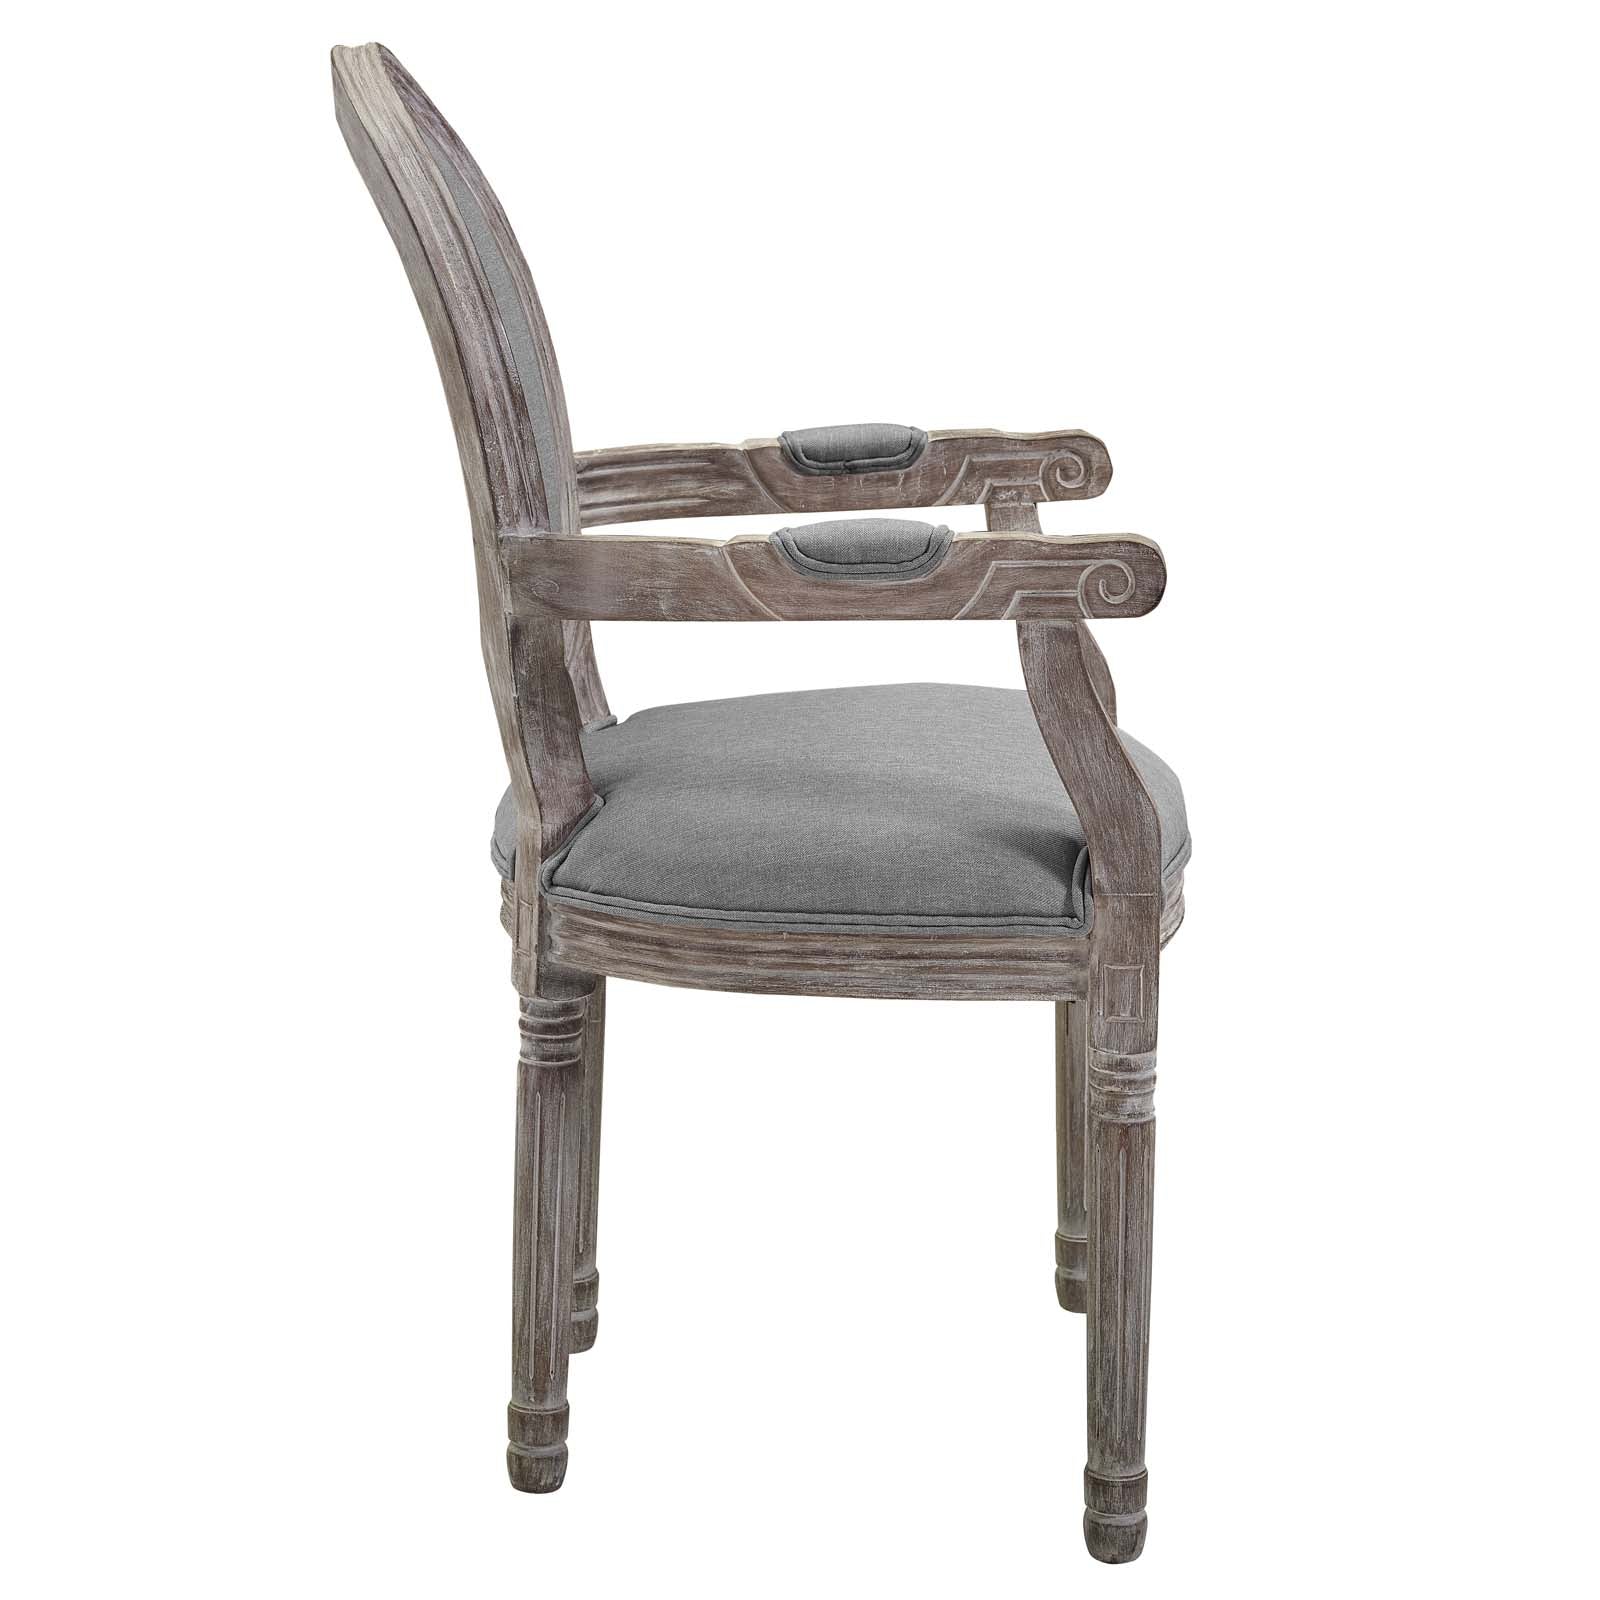 Emanate Vintage French Upholstered Fabric Dining Armchair - East Shore Modern Home Furnishings